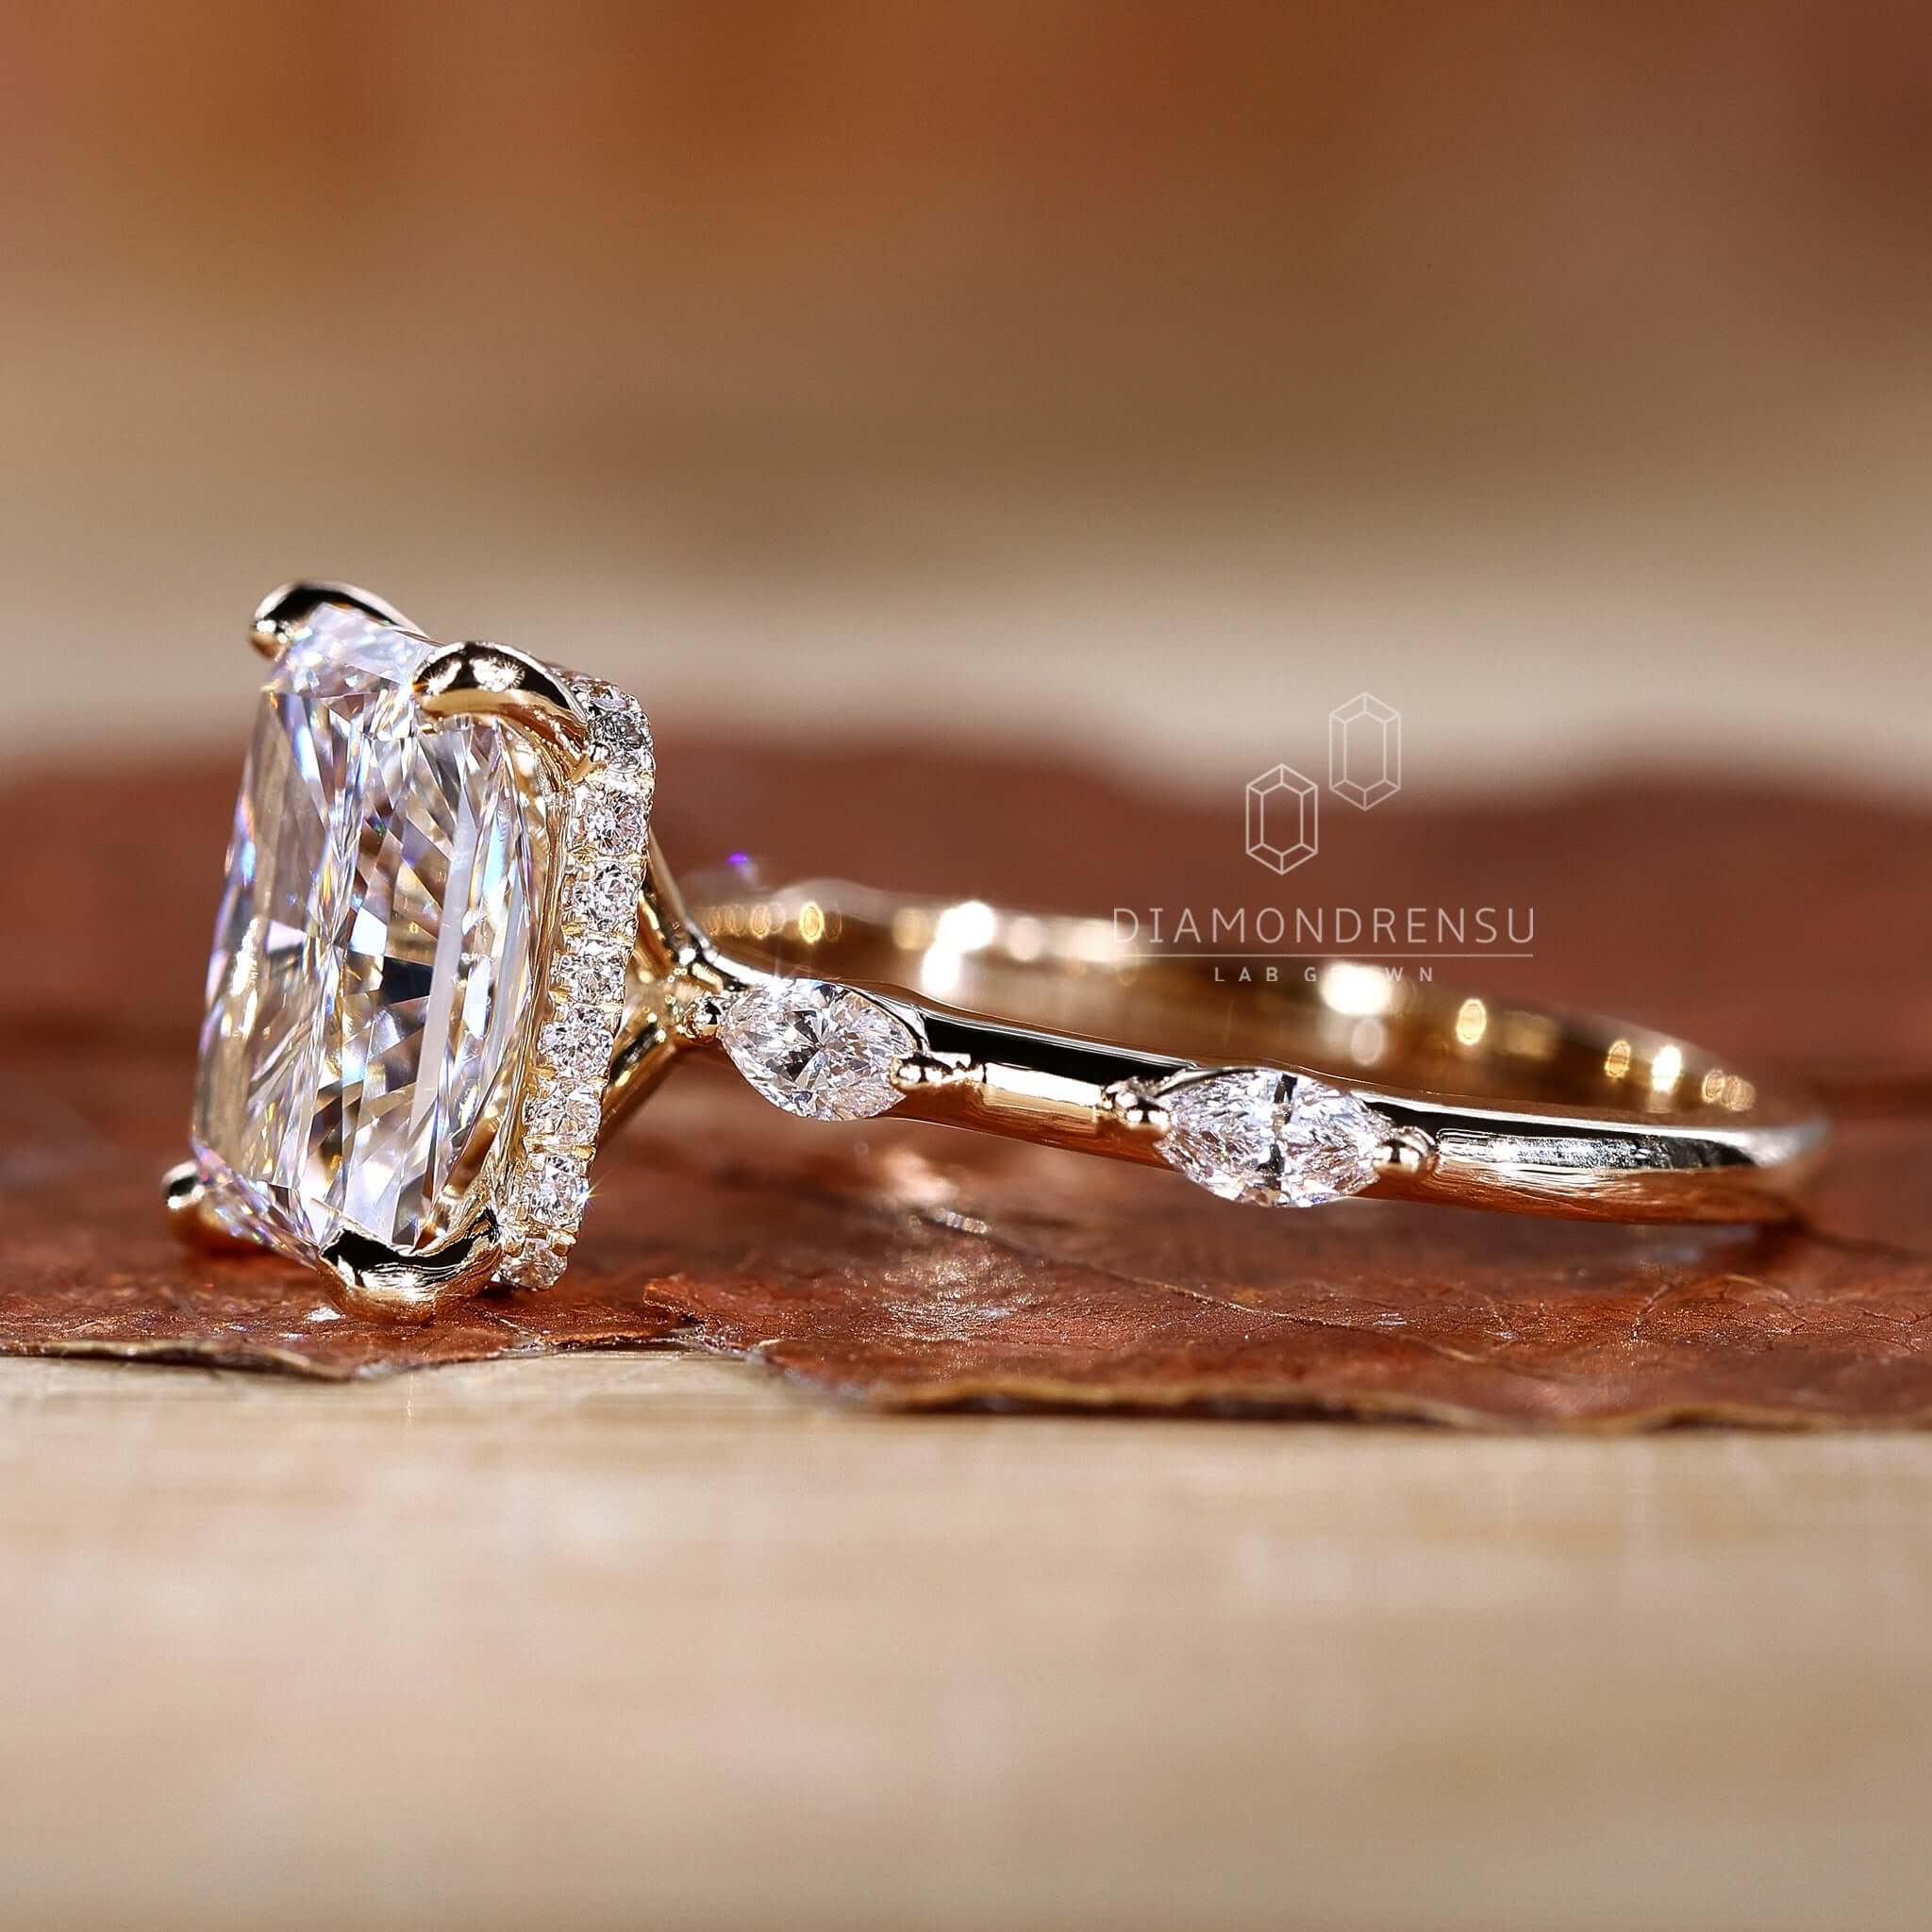 Hand wearing a radiant cut ring, highlighting its unique shape and sparkling beauty